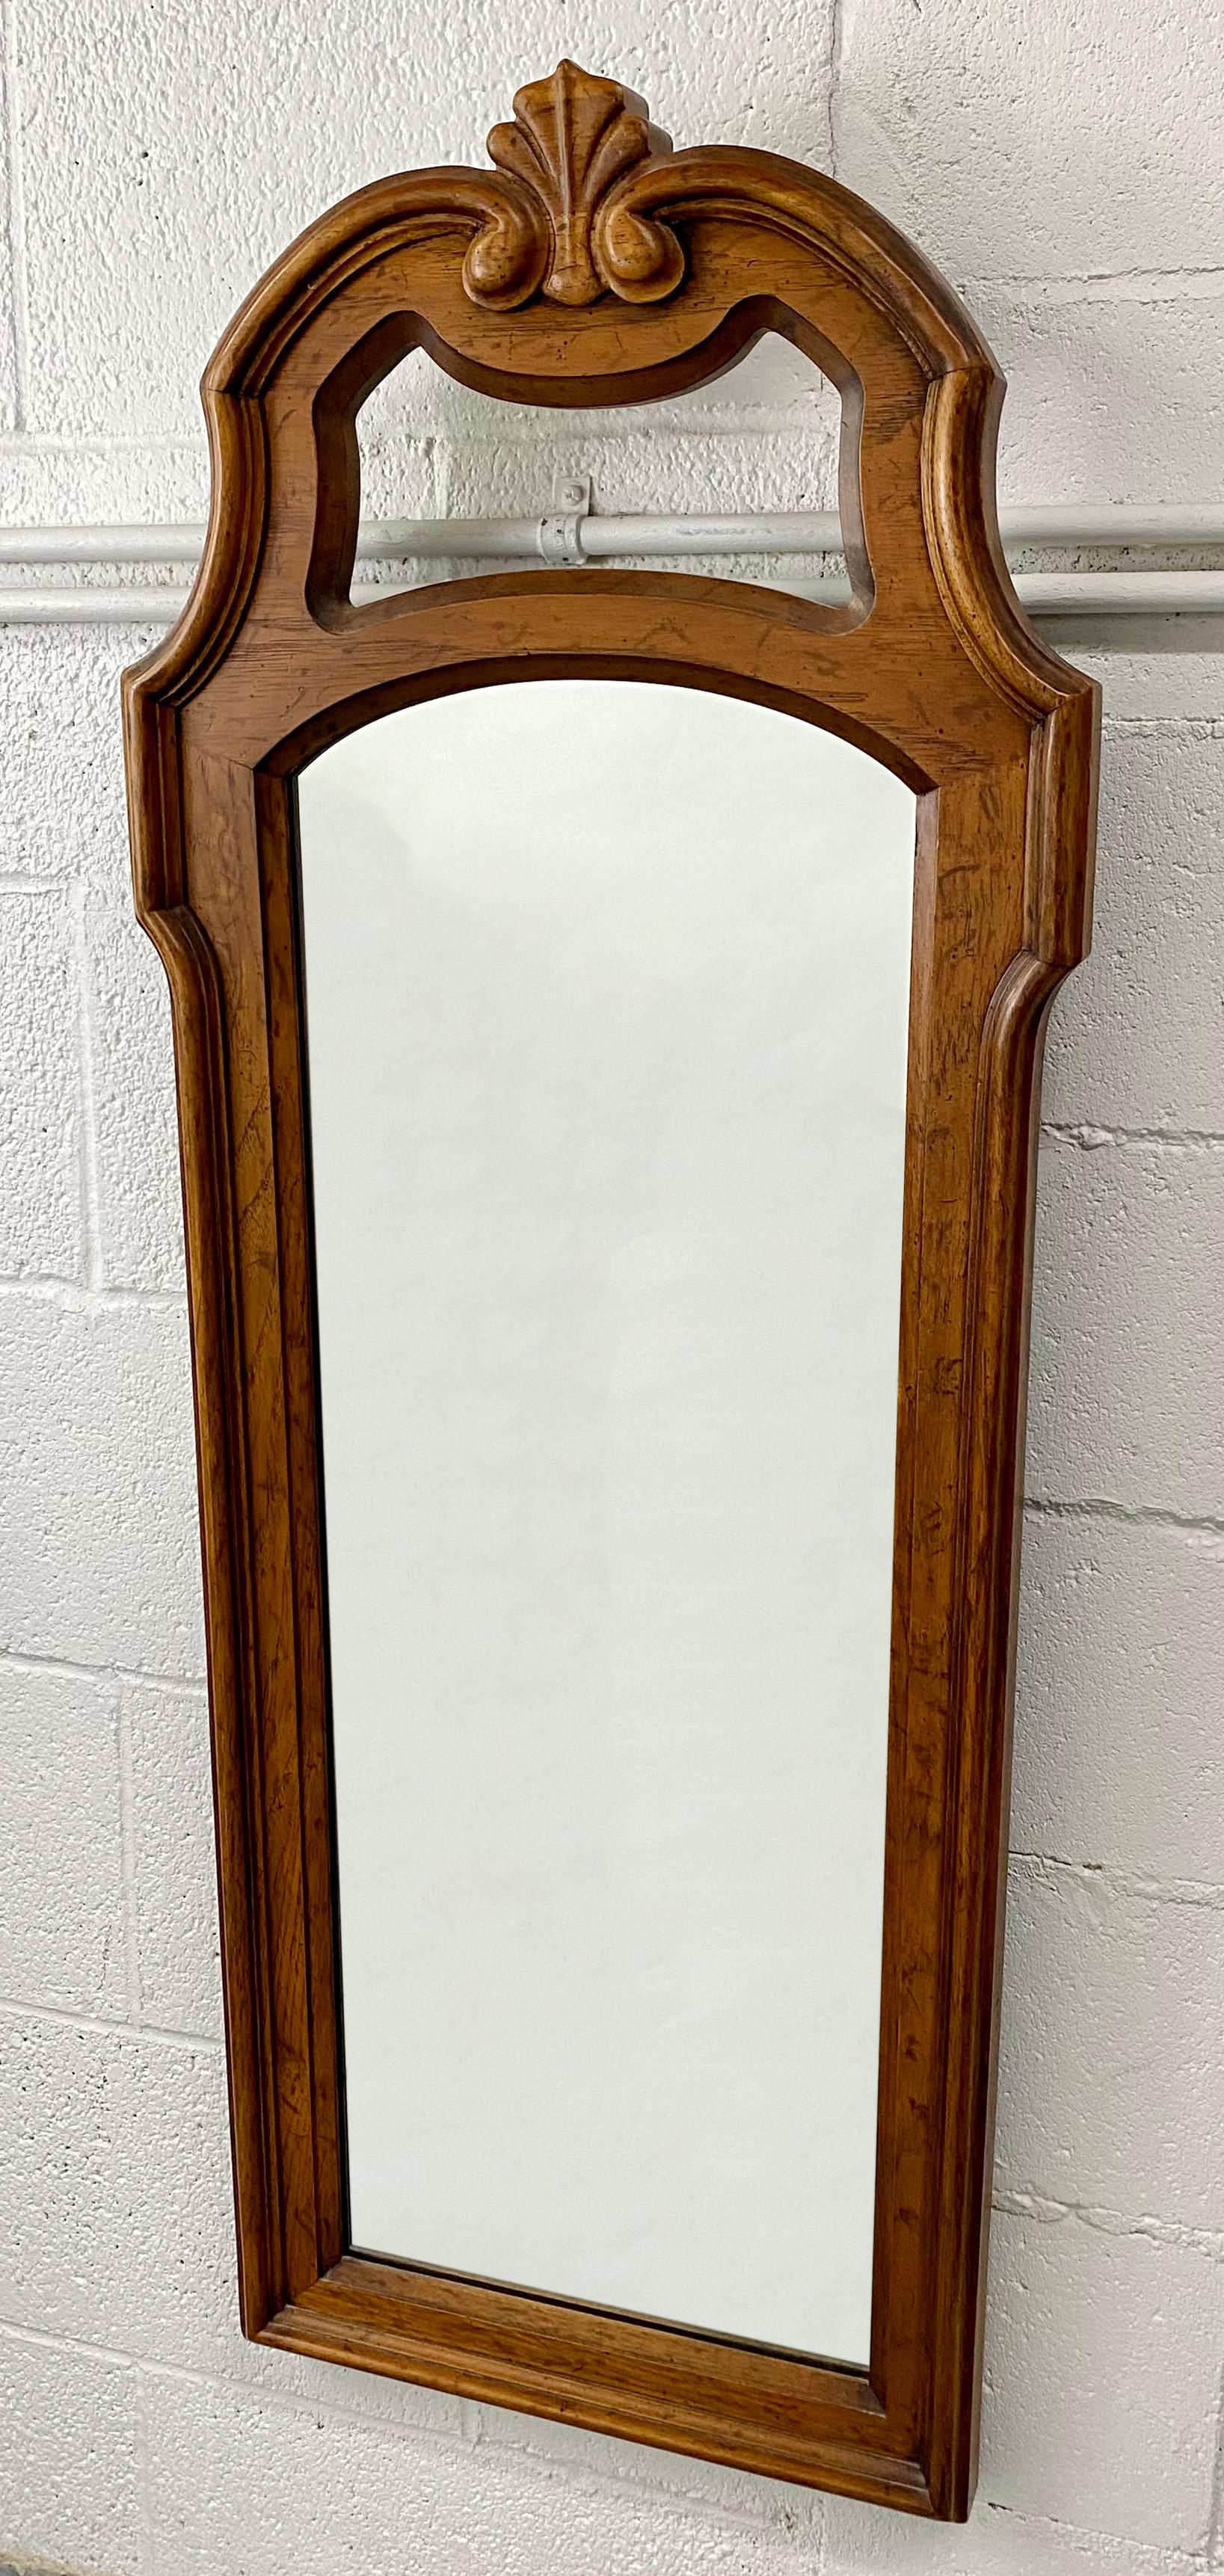 American French Provincial Style Pine Wood Wall Tall Mirror by Drexel, a Pair For Sale